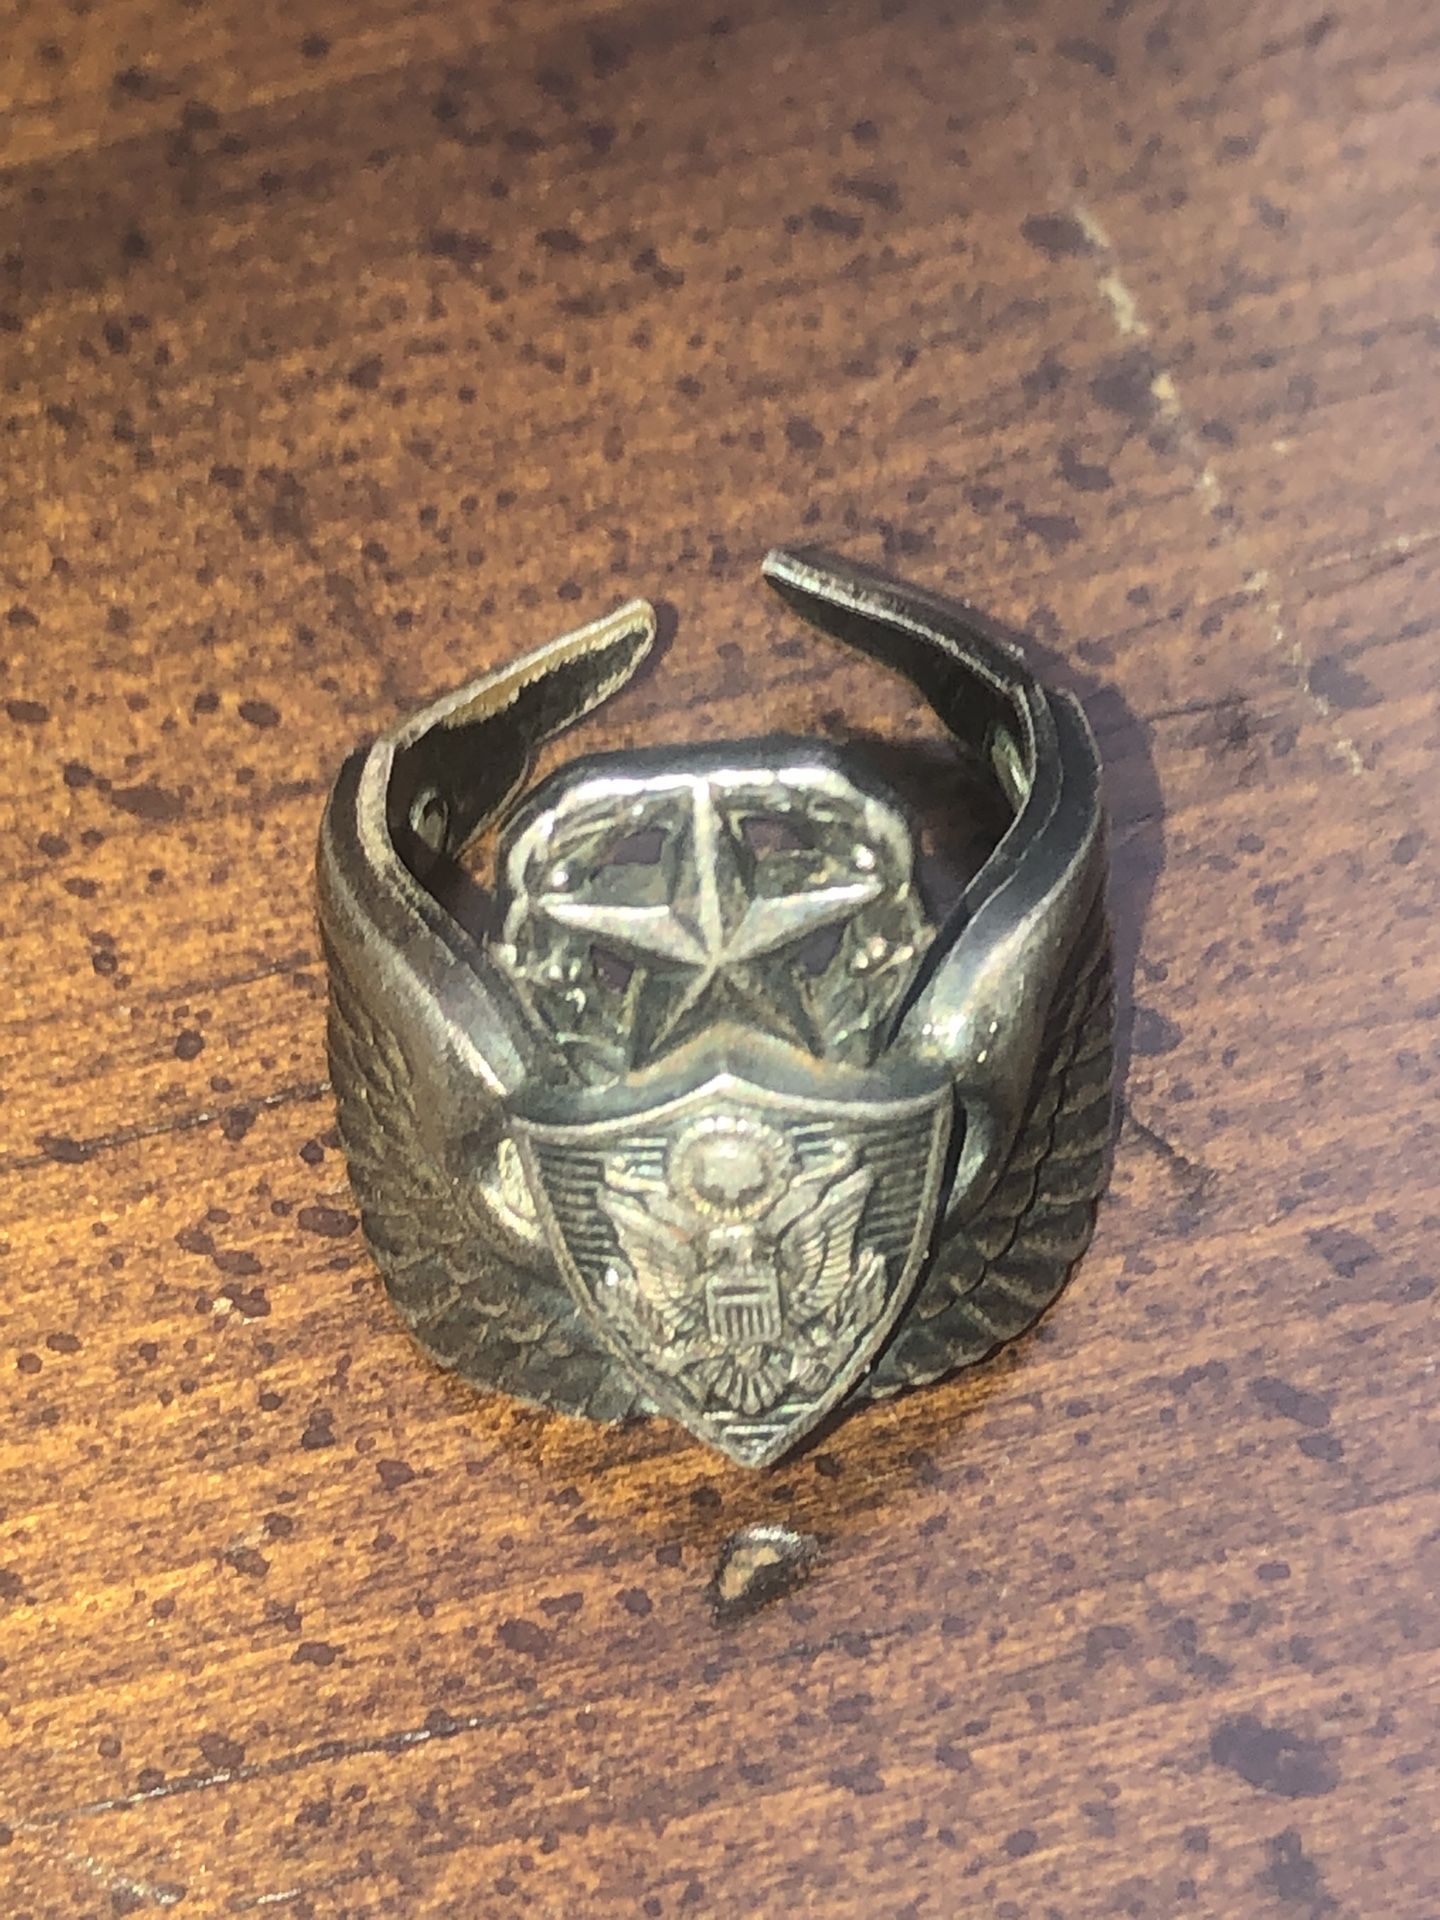 Army Wings turned To Ring